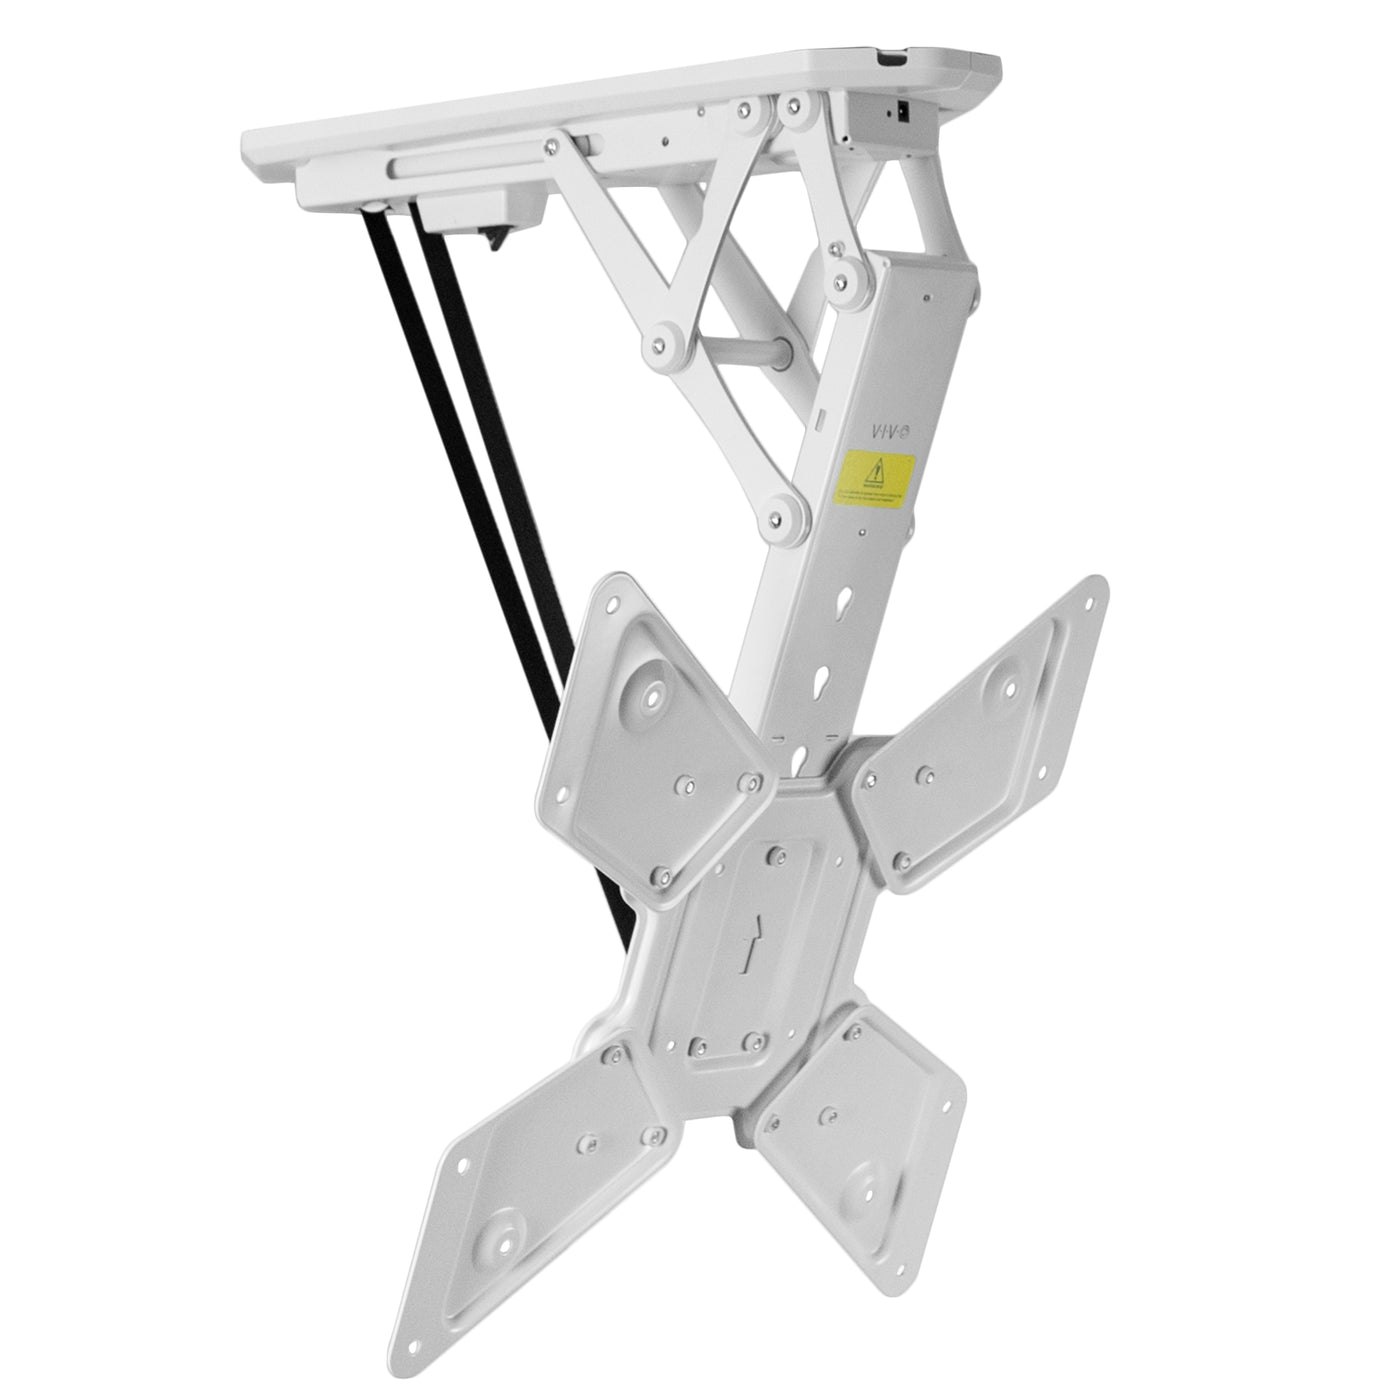 White electric flip-down ceiling TV mount from VIVO.